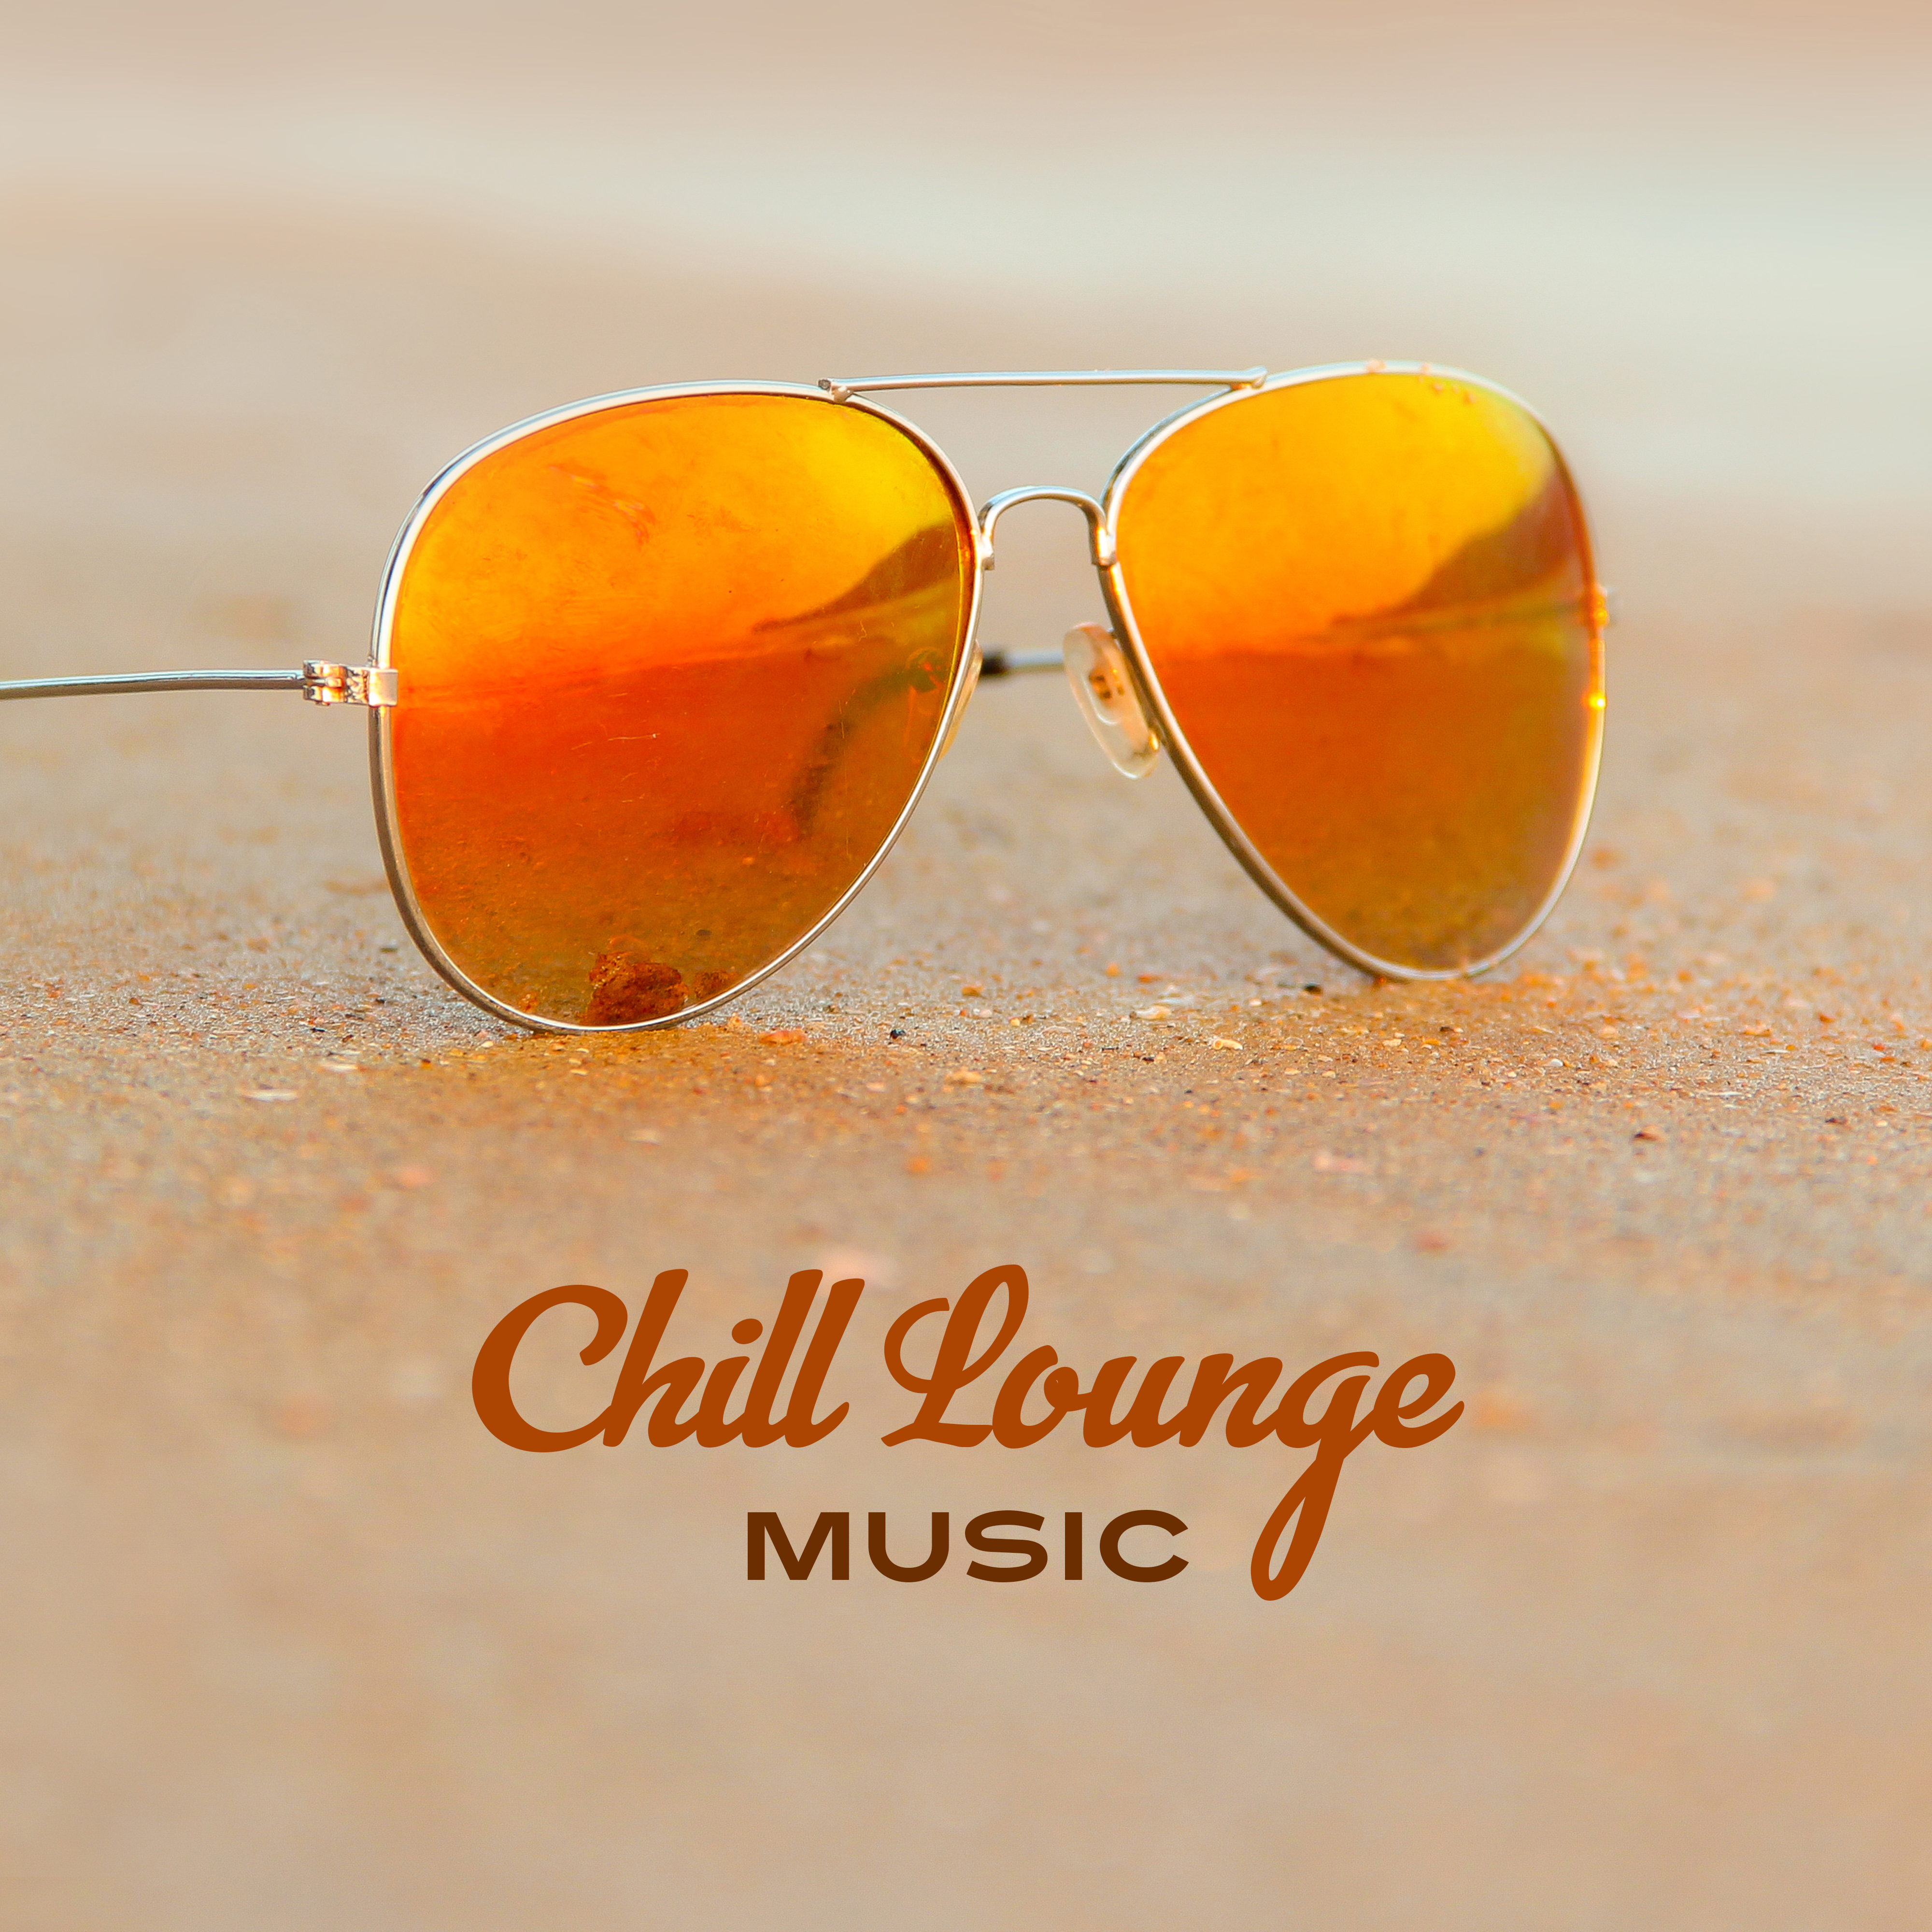 Chill Lounge Music  Calming Sounds, Summer Music to Relax, Tropical Island Sounds, Chilled Note